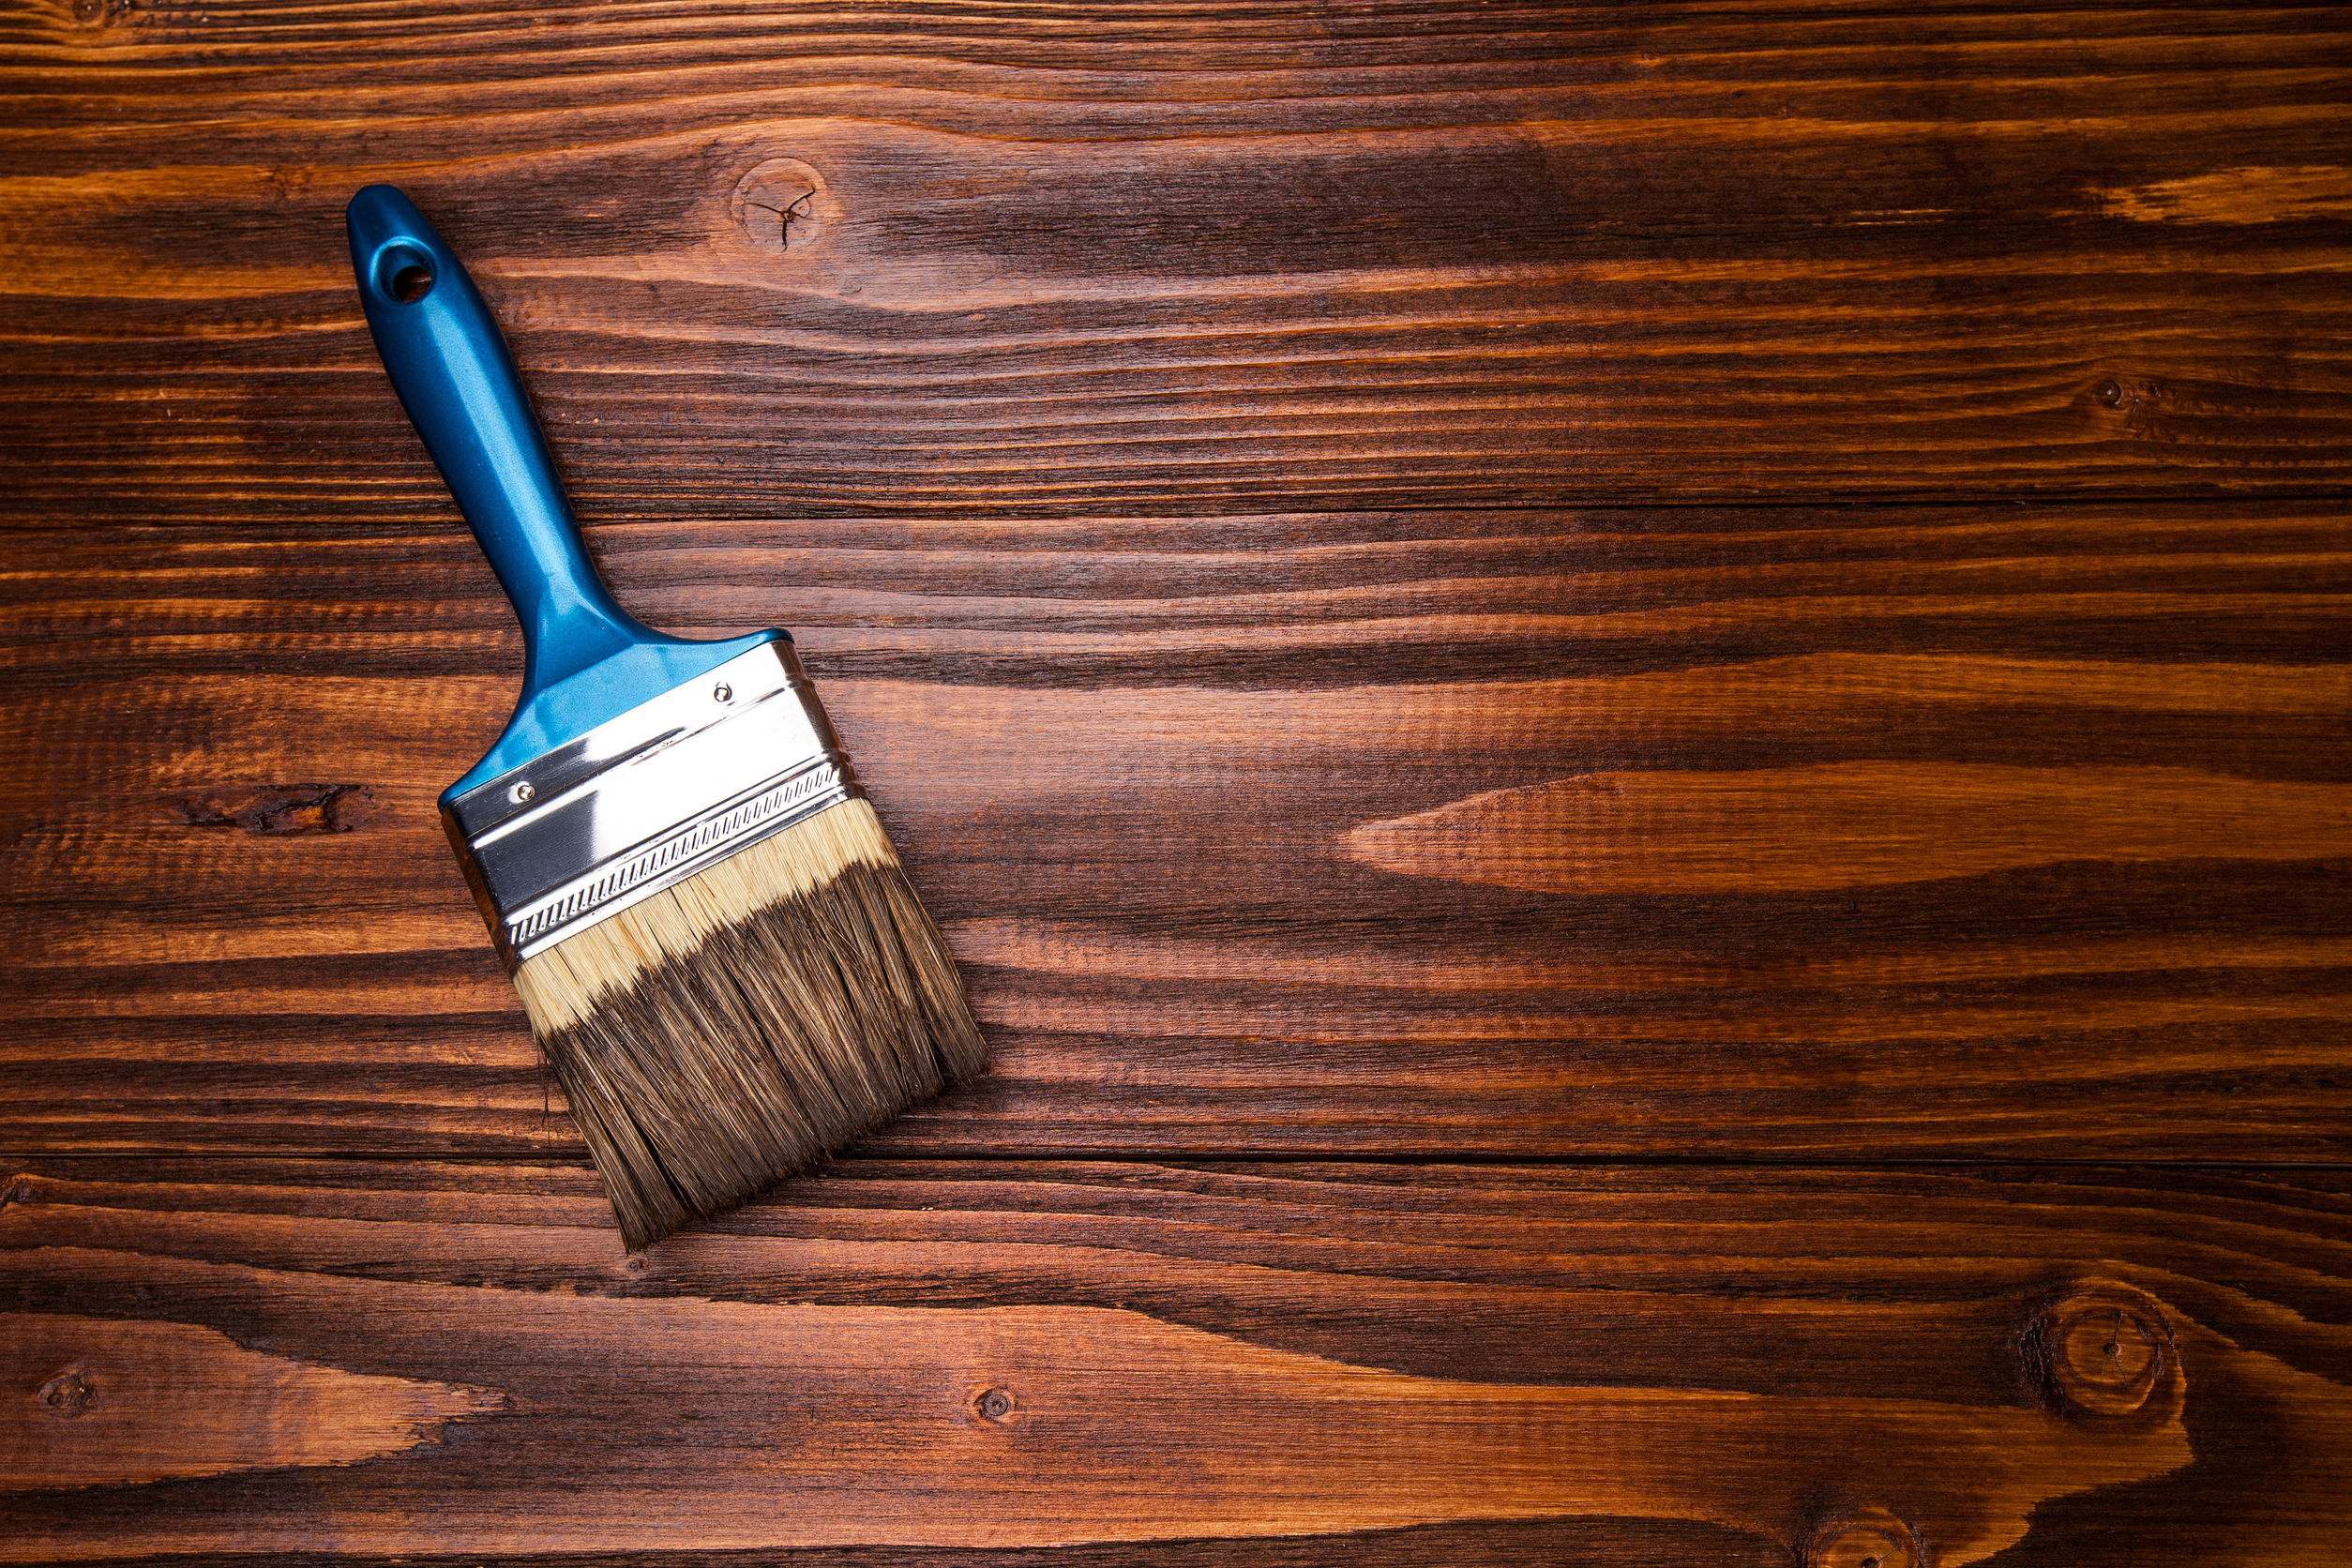 How To Stain Wood Floors Without The Blotchy Effect